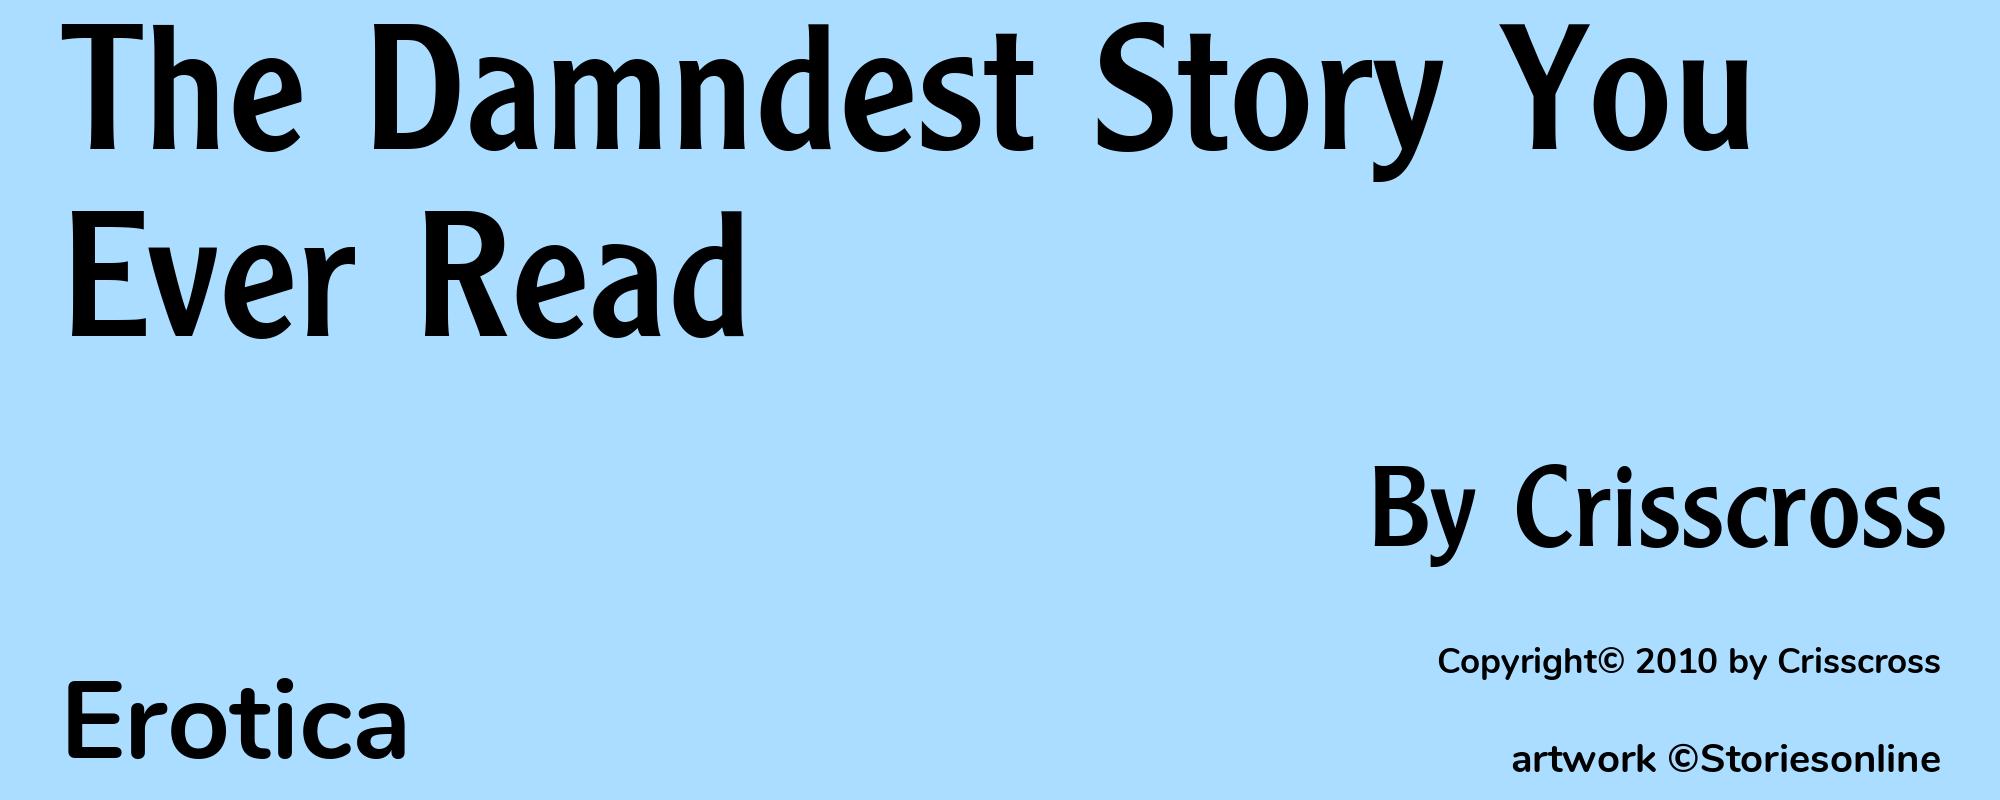 The Damndest Story You Ever Read - Cover